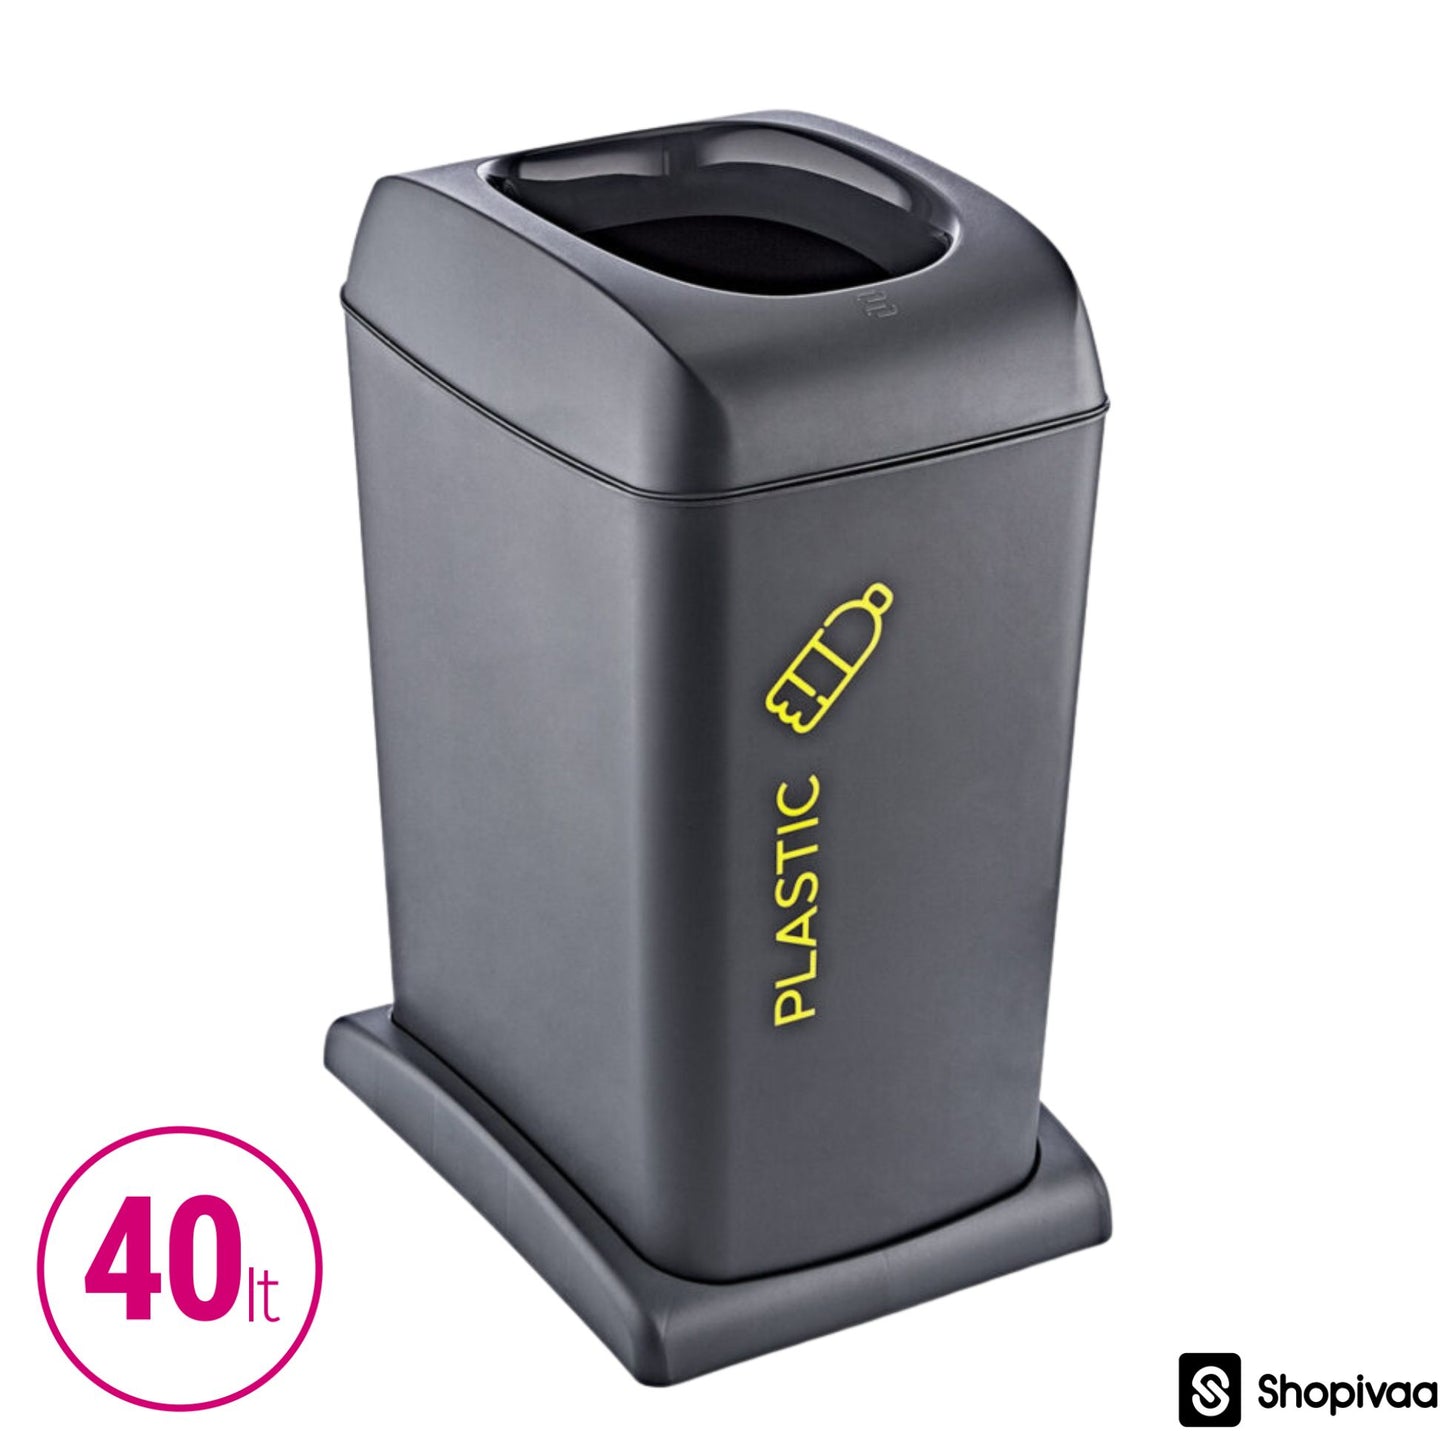 Shopivaa Triple Rubbish Waste Separation Sorting Bin Three Compartments Recycling Bin 120L 3 x 40L Kitchen Office Lightweight Plastic Castor Wheels Labelled For Paper Glass Plastic